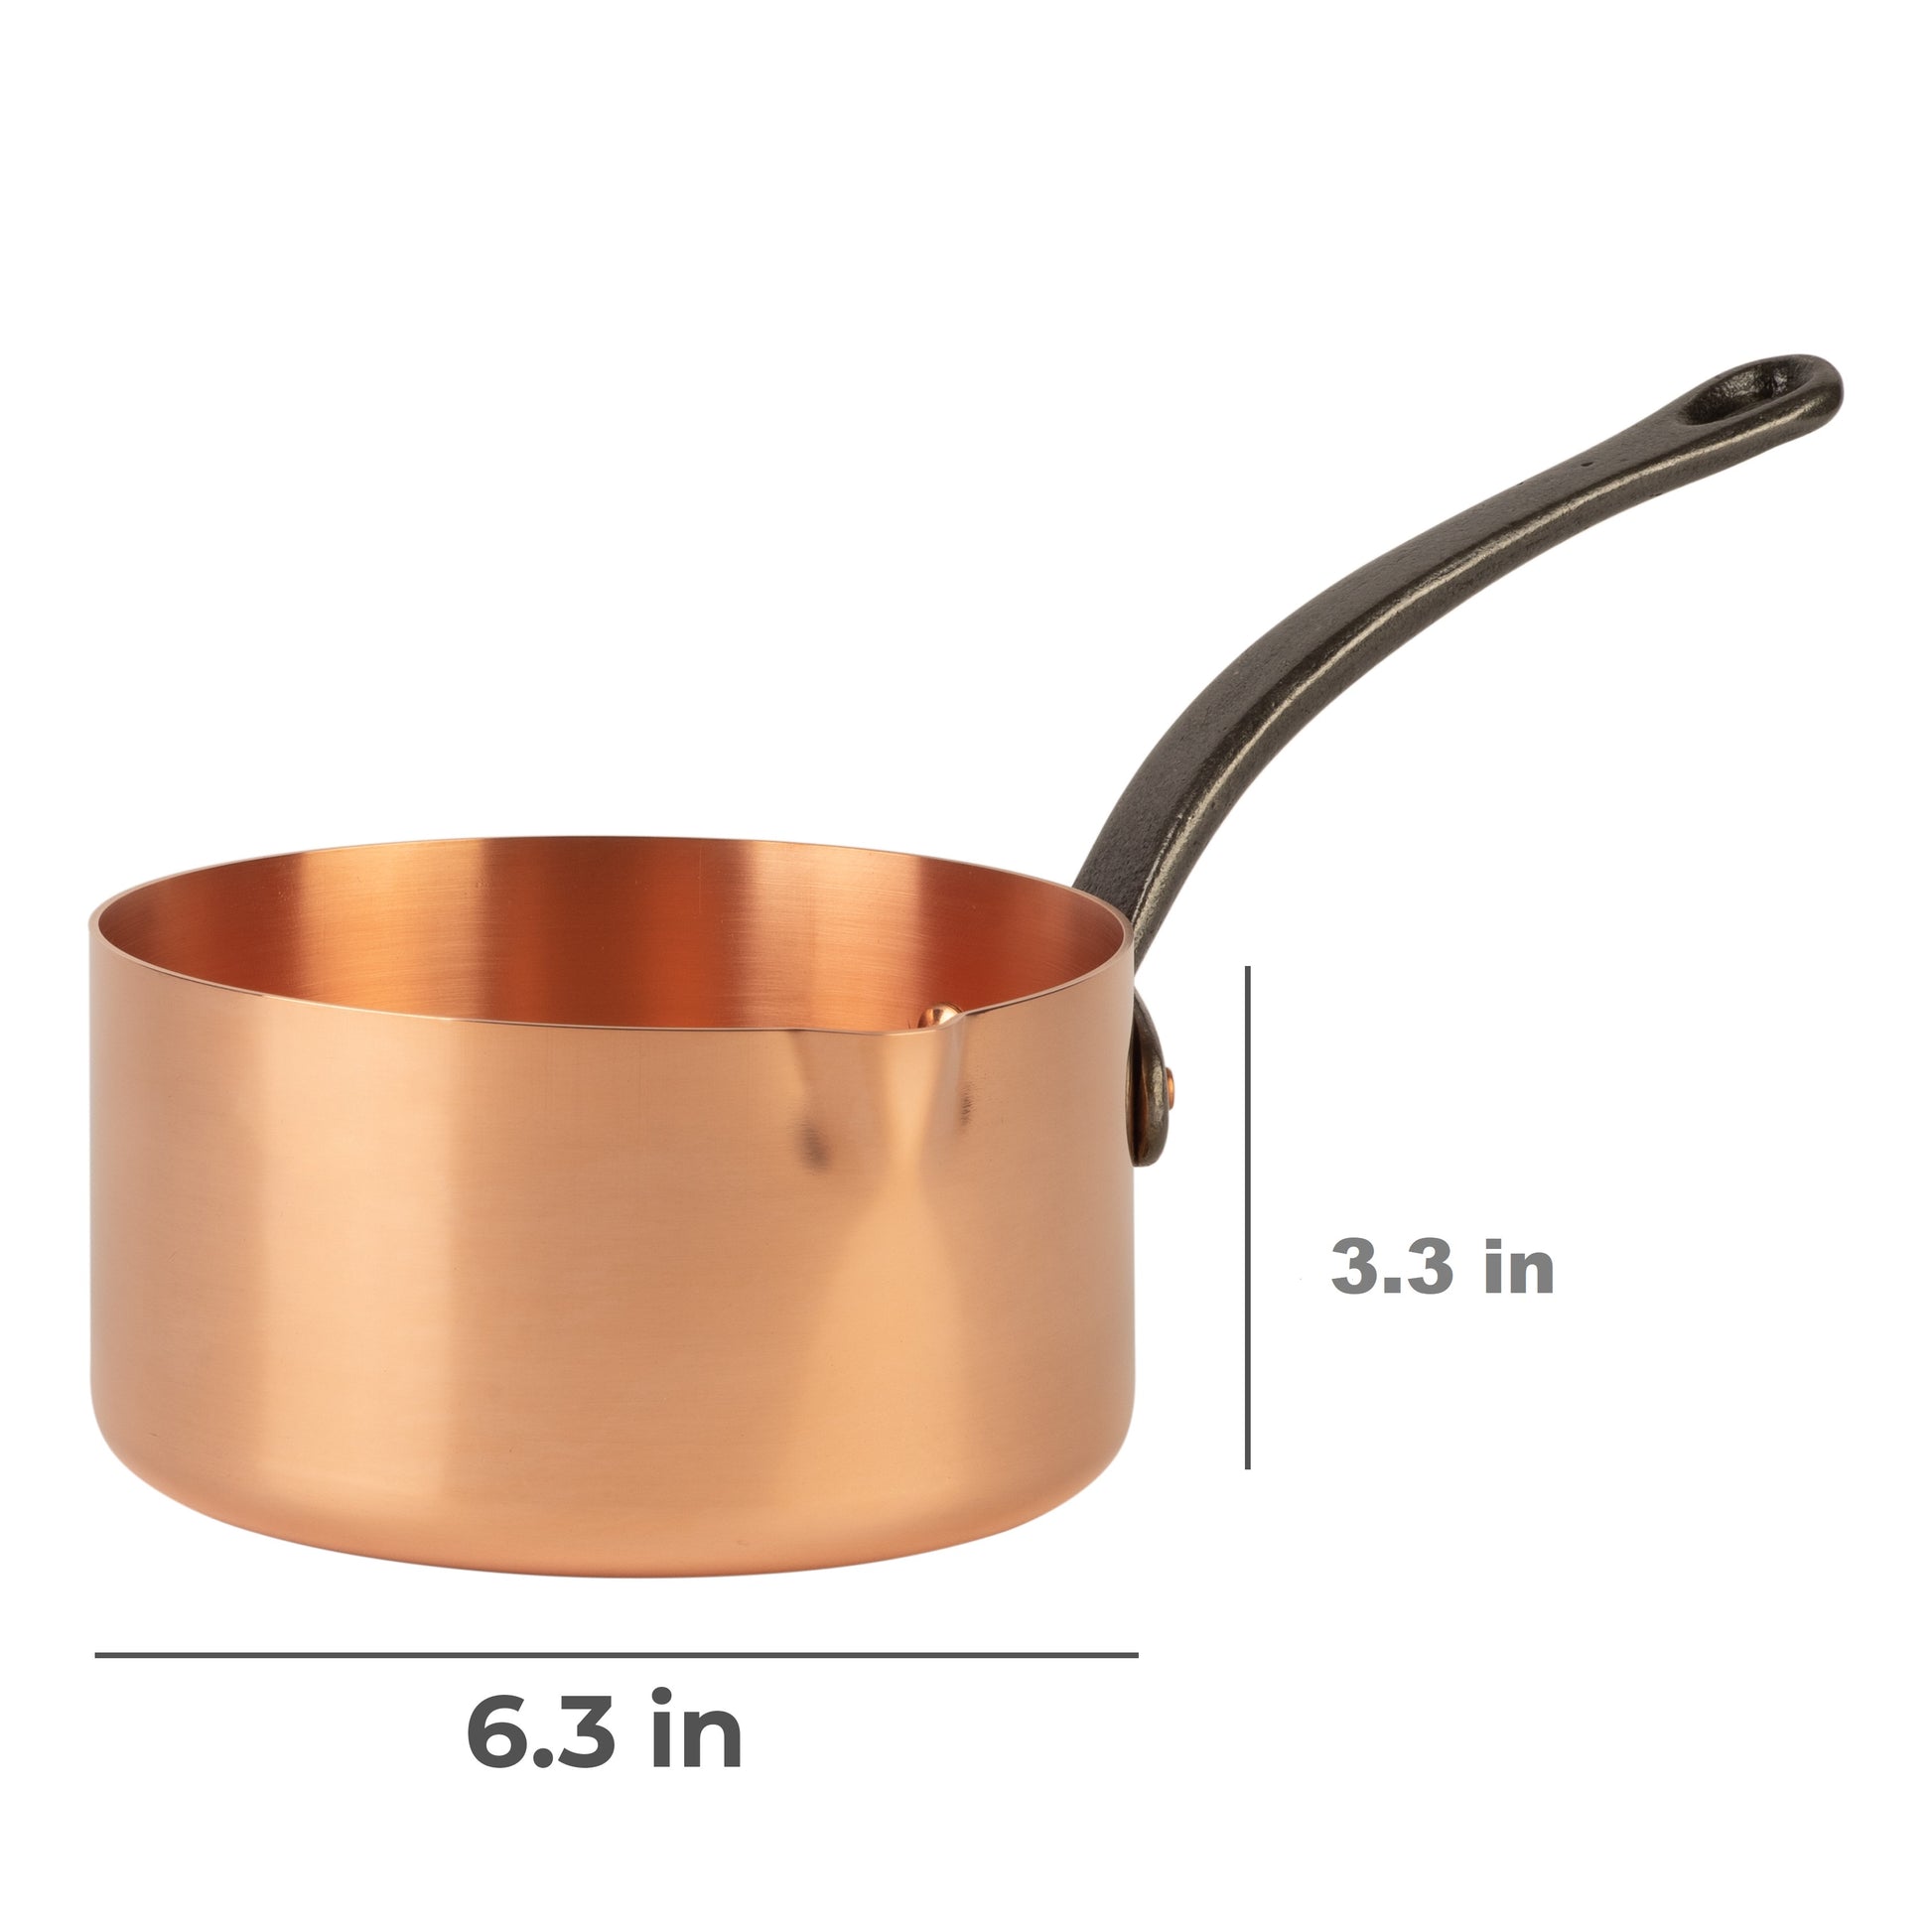 Copper - Sauce Pot, 1.5 quart with lid, Polished Finish – The